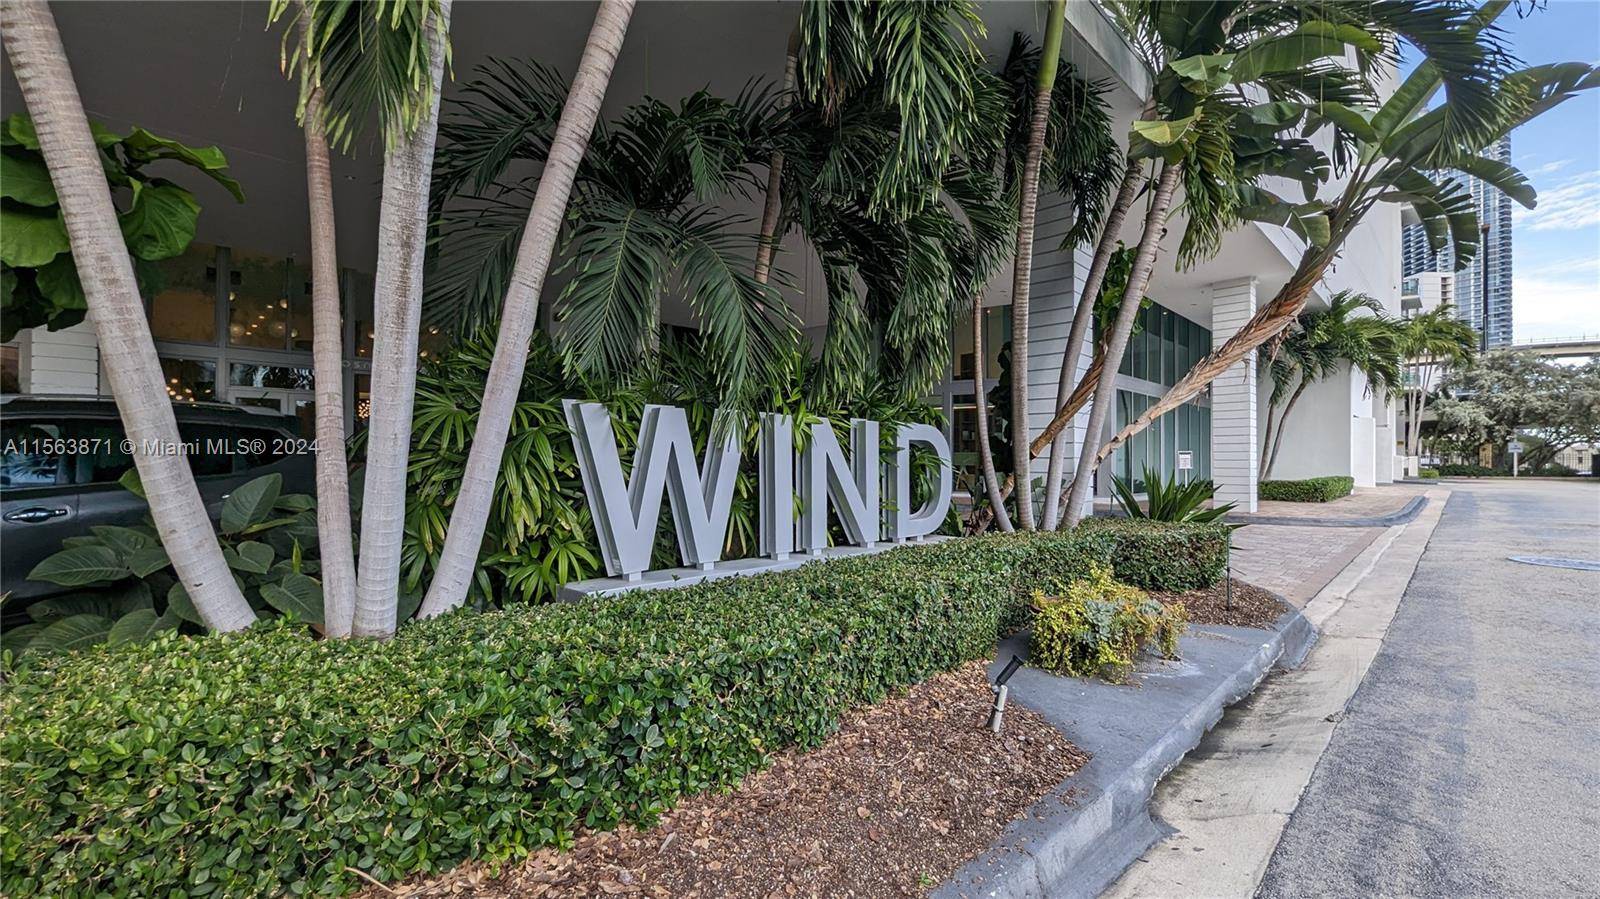 Great loft style condo with magnificent views of the Miami River, Close to I 95, Stainless steel appliances, washer, and dyer inside the unit.